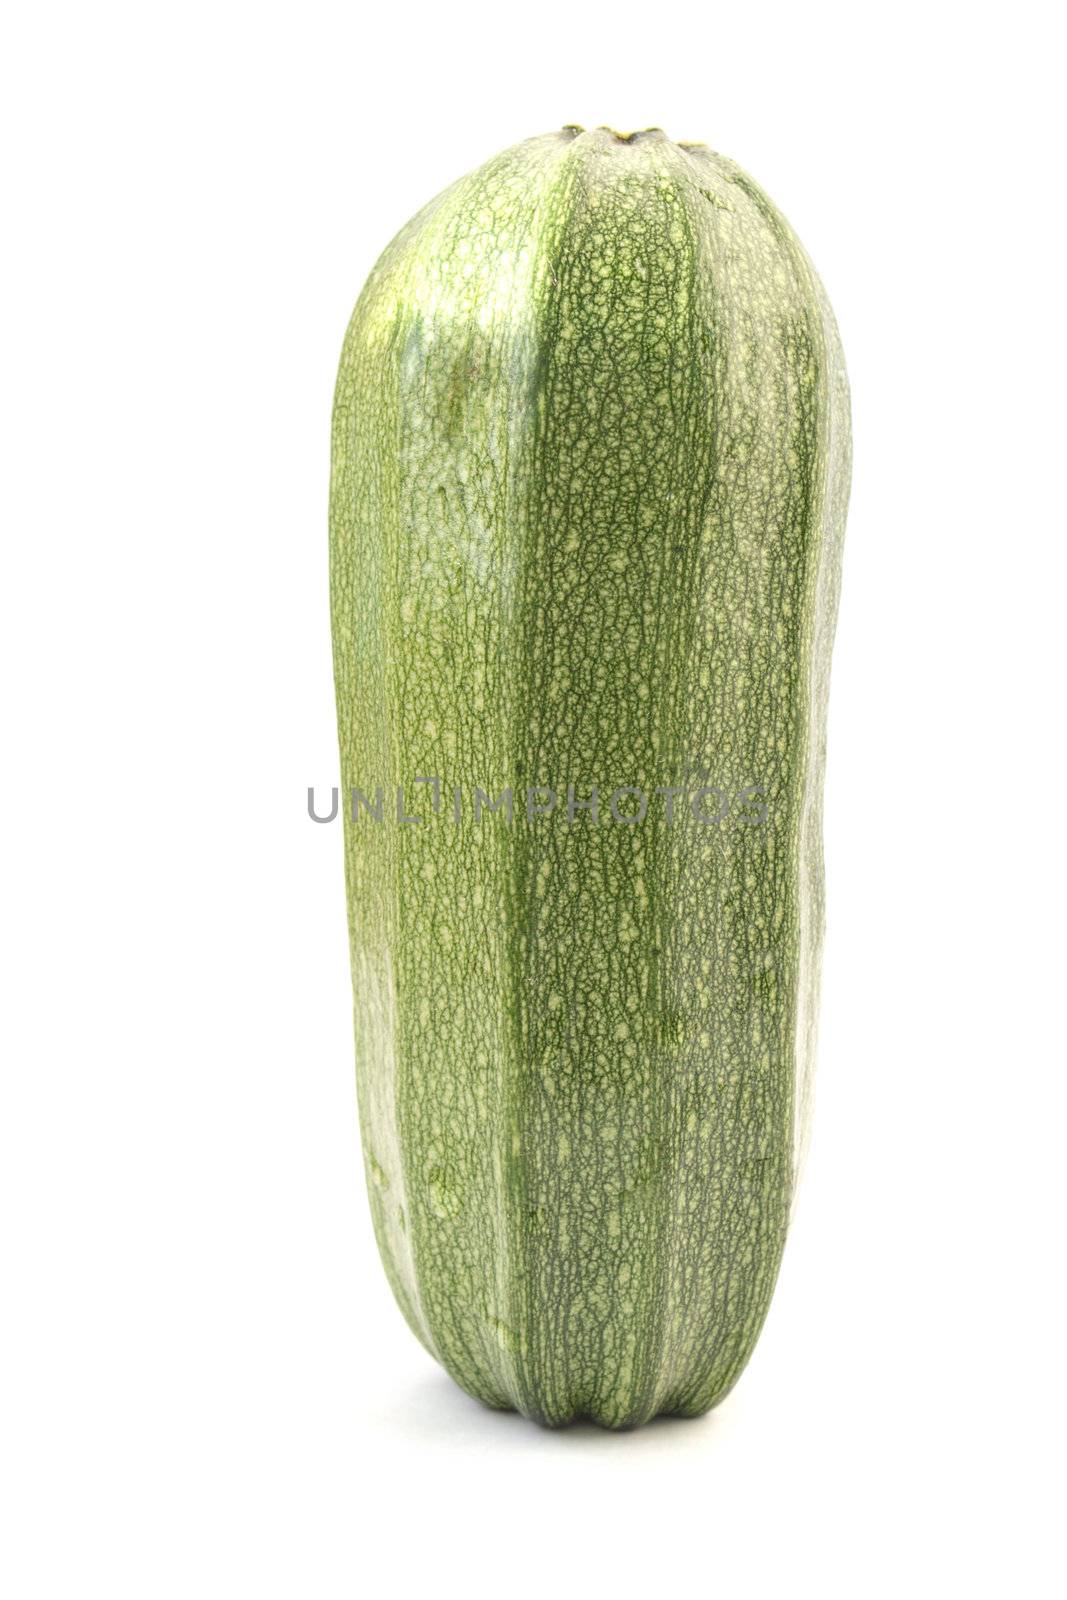 Single green zucchini isolated on white by pulen